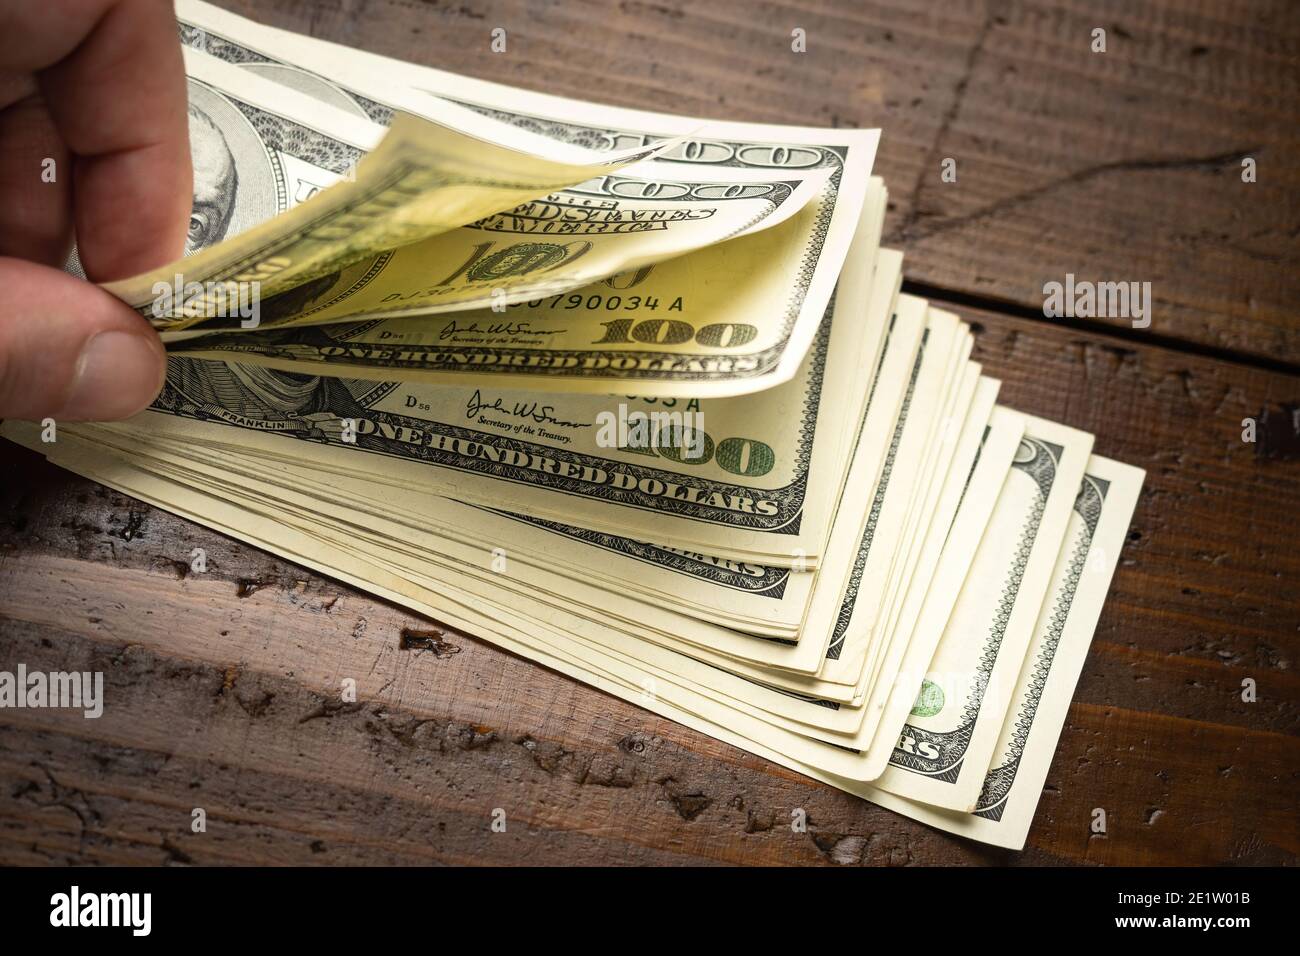 Hand counting pile of one hundred US banknotes on wooden table background. Cash of hundred dollar bills, paper money currency. Stock Photo